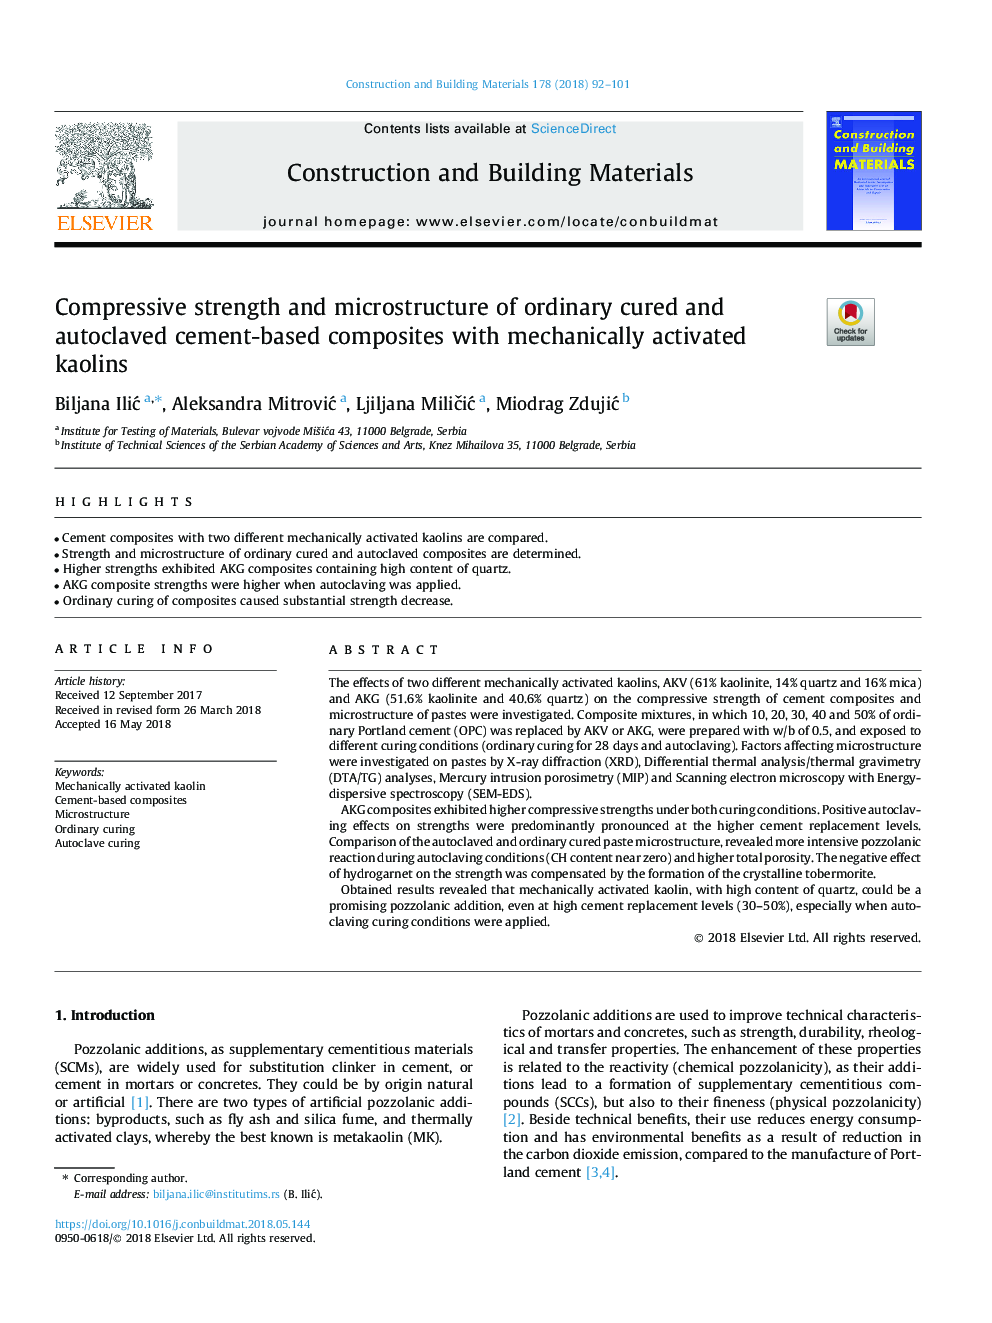 Compressive strength and microstructure of ordinary cured and autoclaved cement-based composites with mechanically activated kaolins